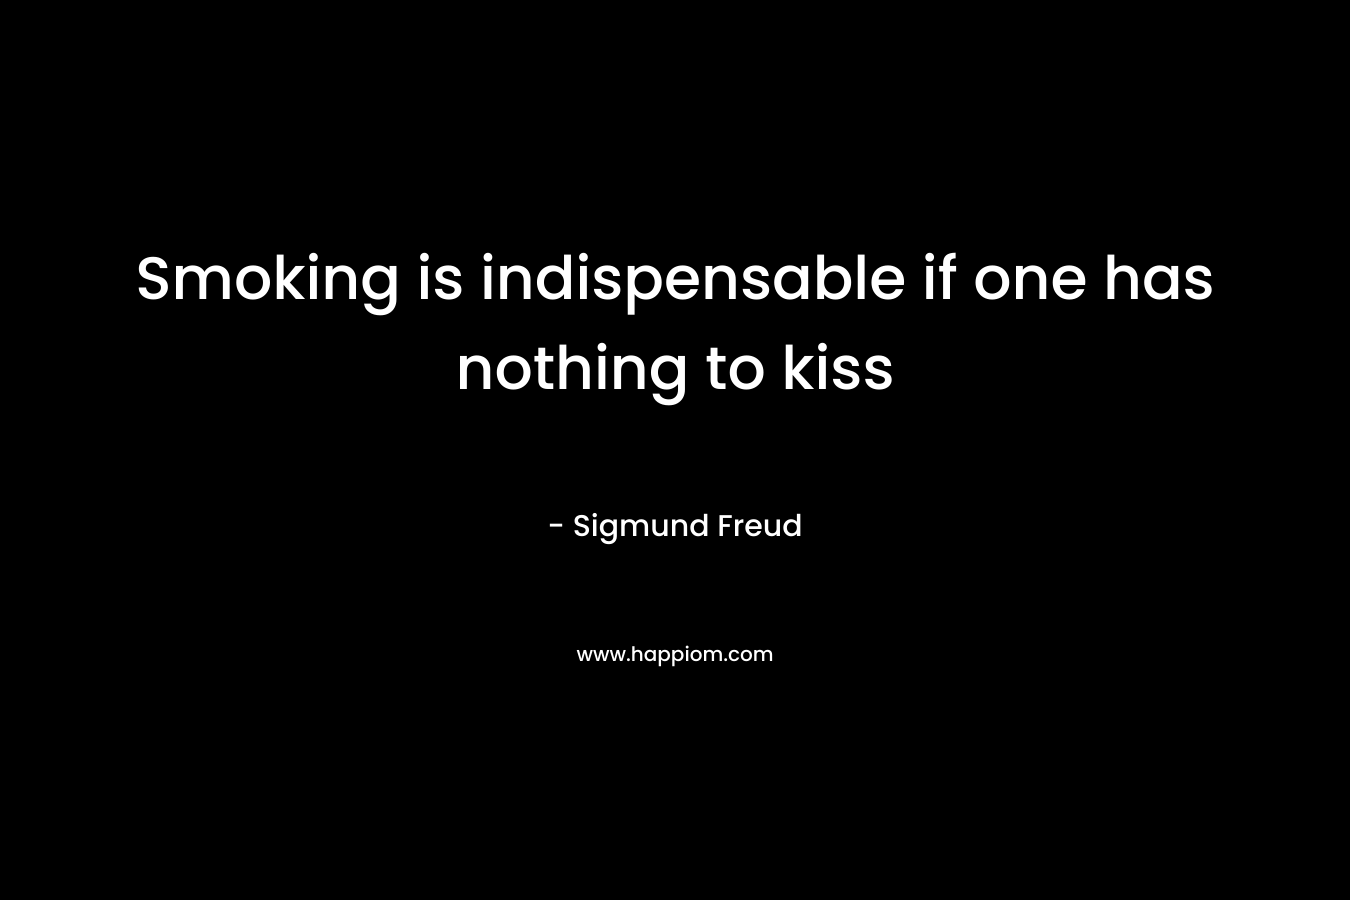 Smoking is indispensable if one has nothing to kiss